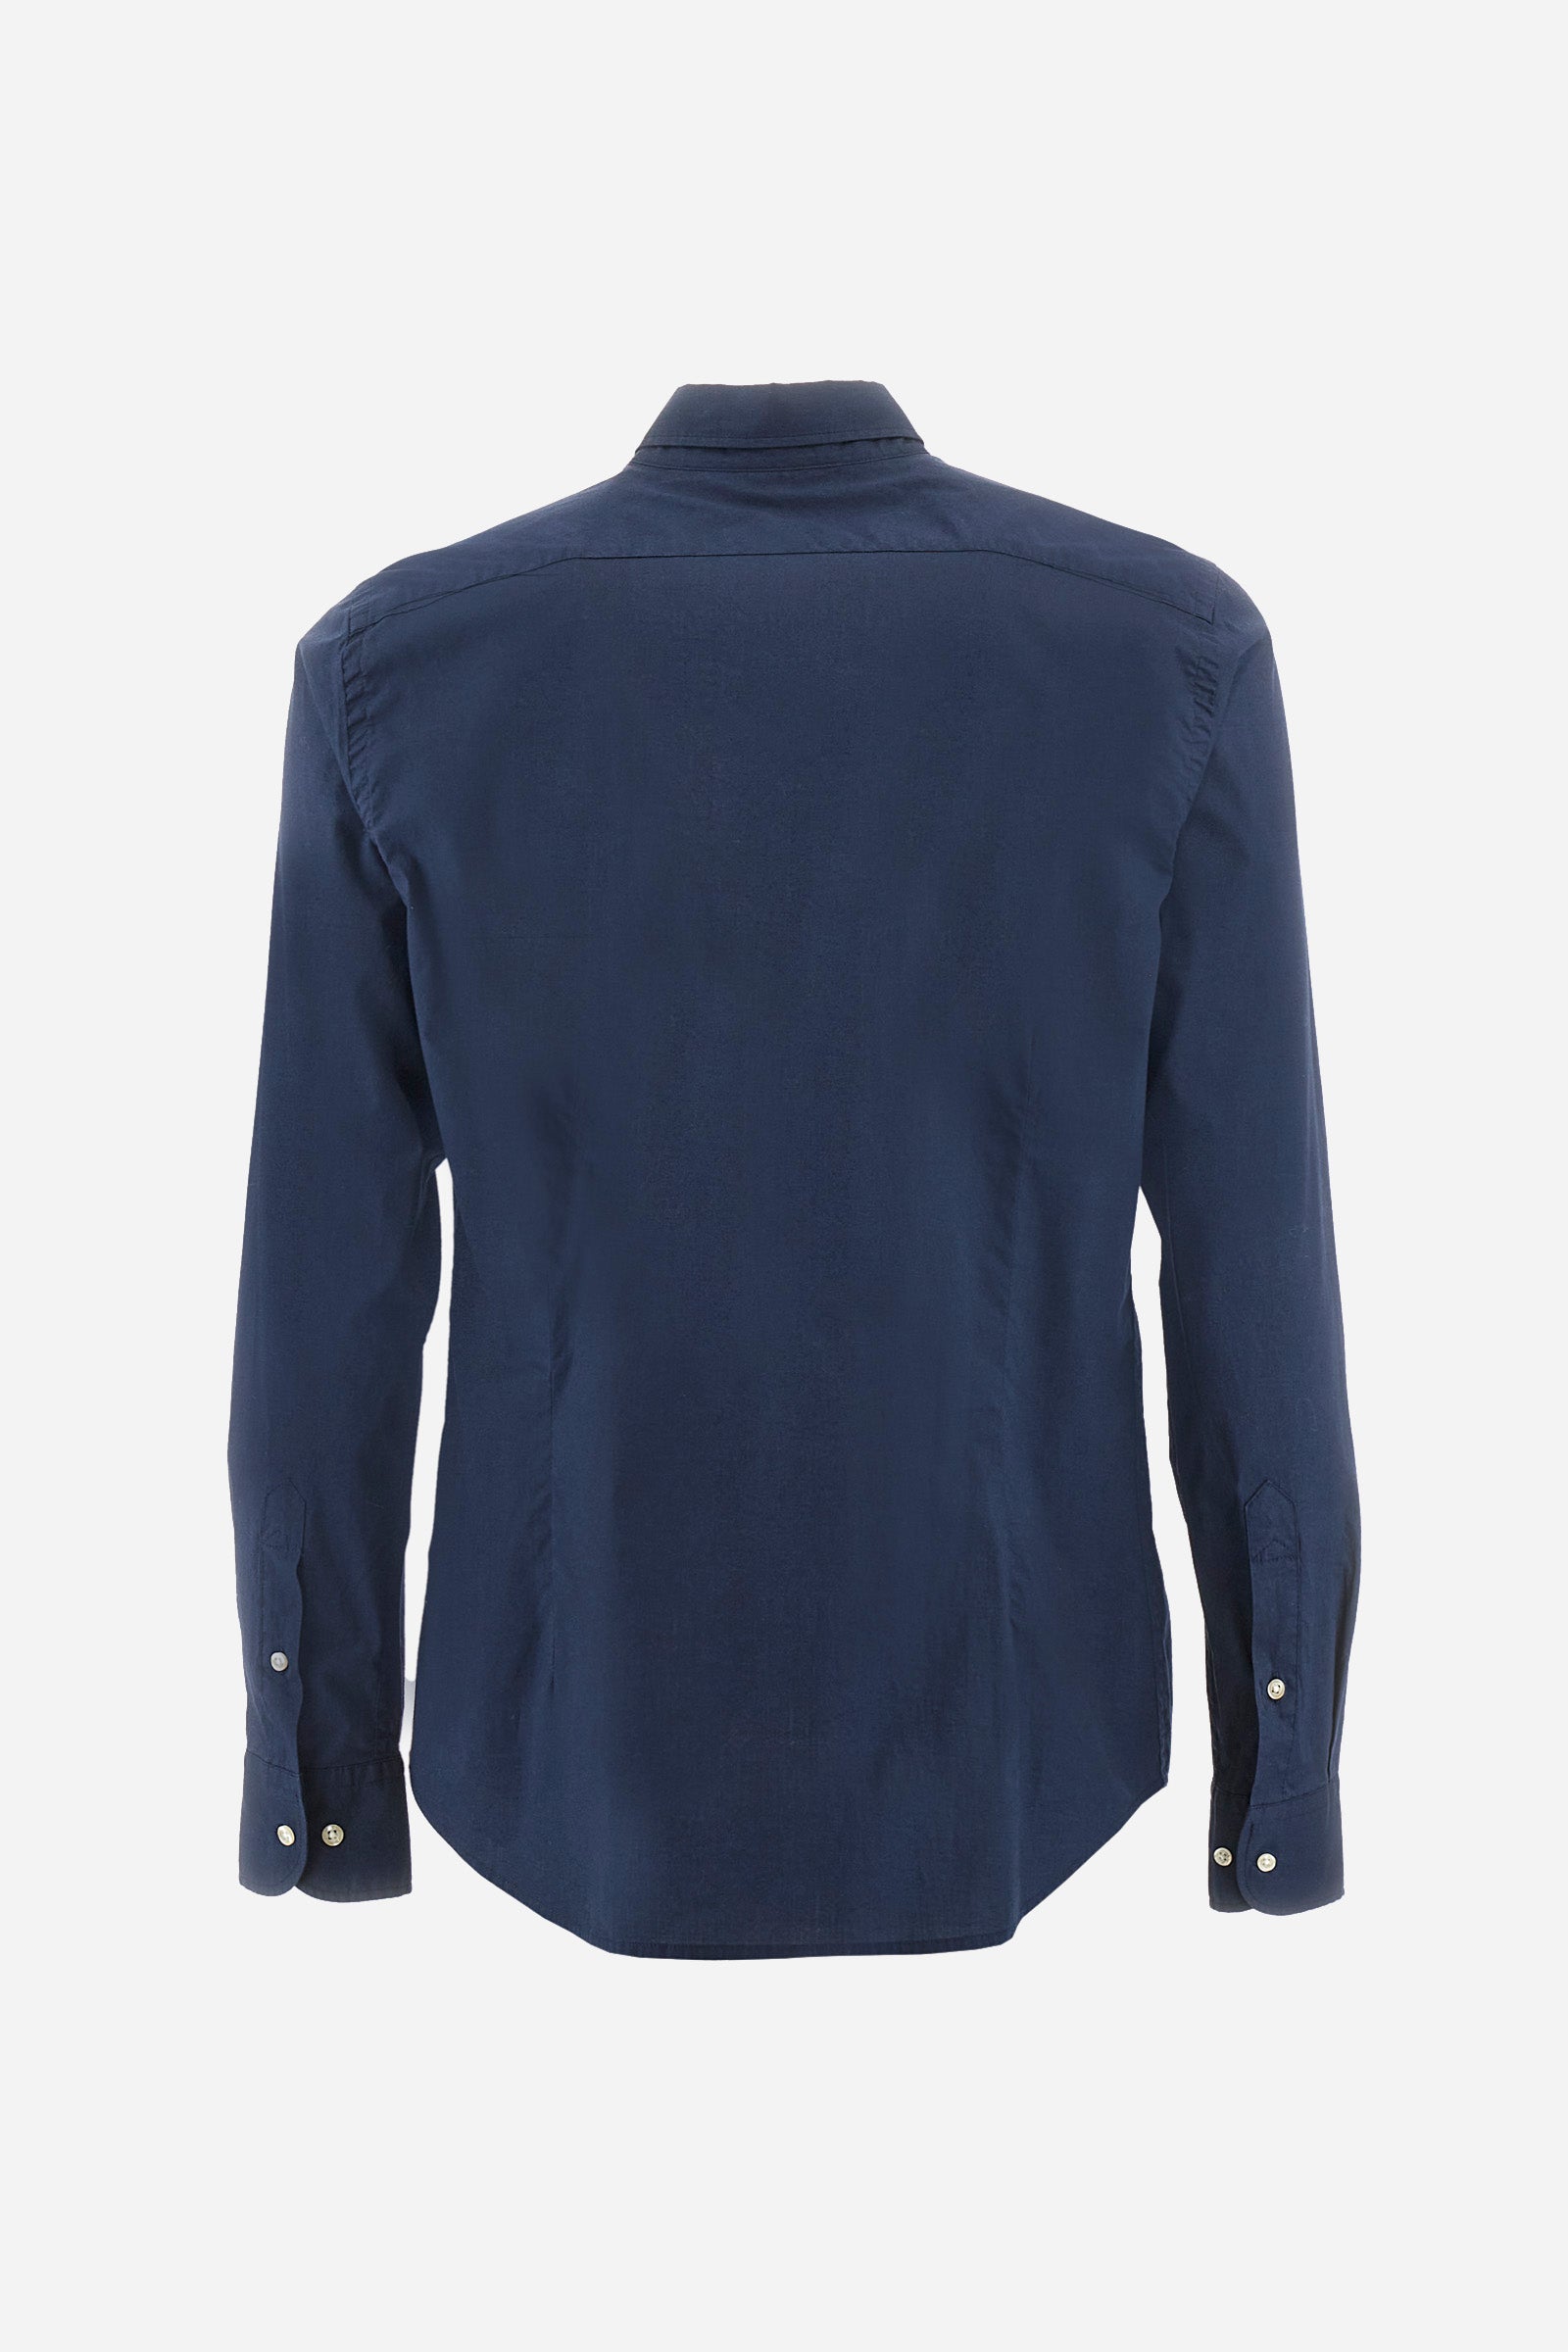 Chemise homme coupe slim